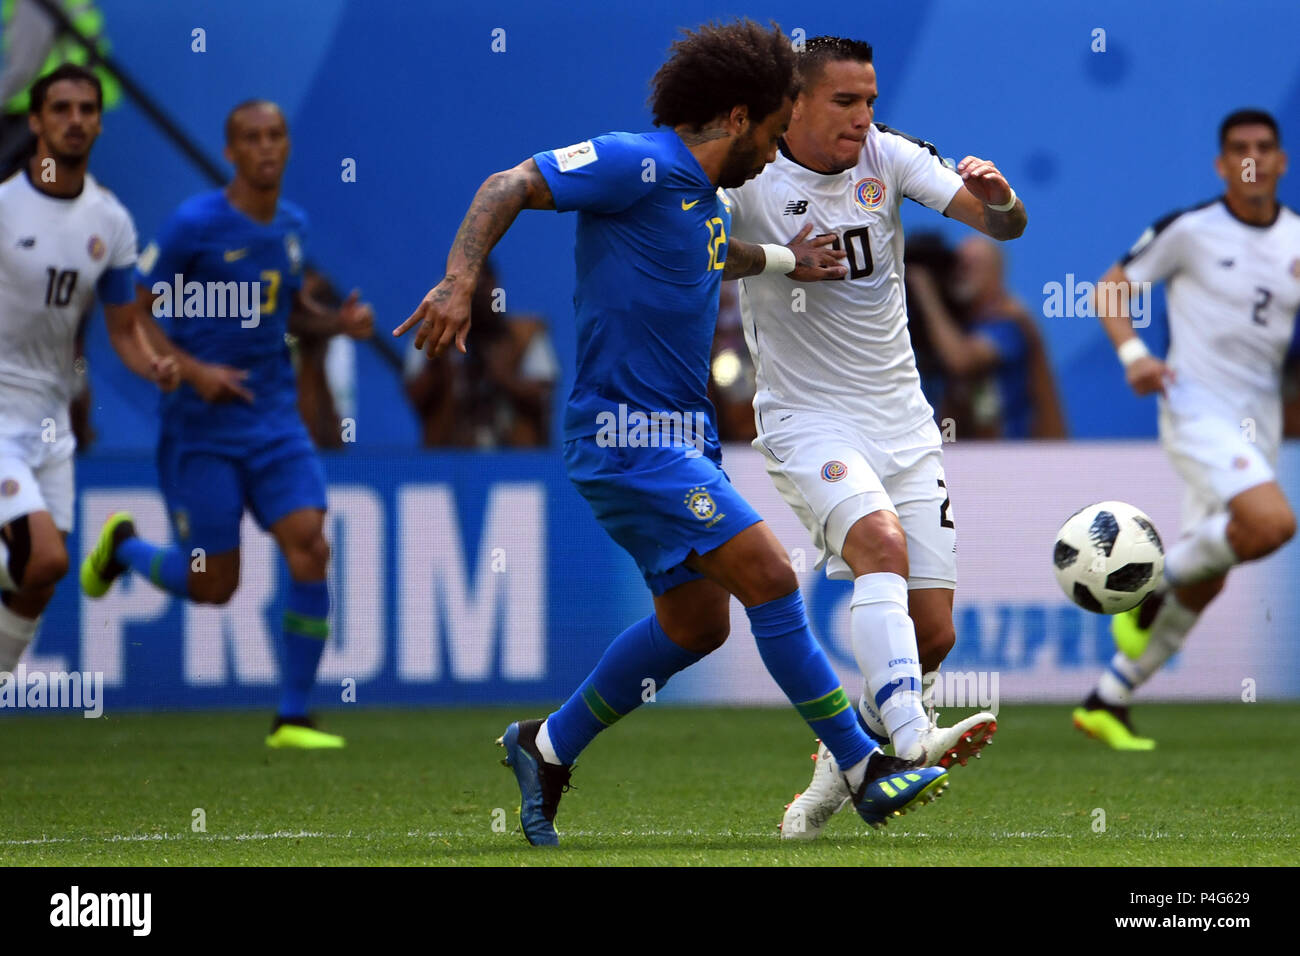 Saint Petersburg, Russia. 22nd June, 2018. Soccer: Preliminary stage, Group E, 2nd matchday: Brazil vs Costa Rica in the St. Petersburg Stadium: Brazil's Marcelo (L) and Costa Rica's David Guzman in action. Credit: Federico Gambarini/dpa/Alamy Live News Stock Photo